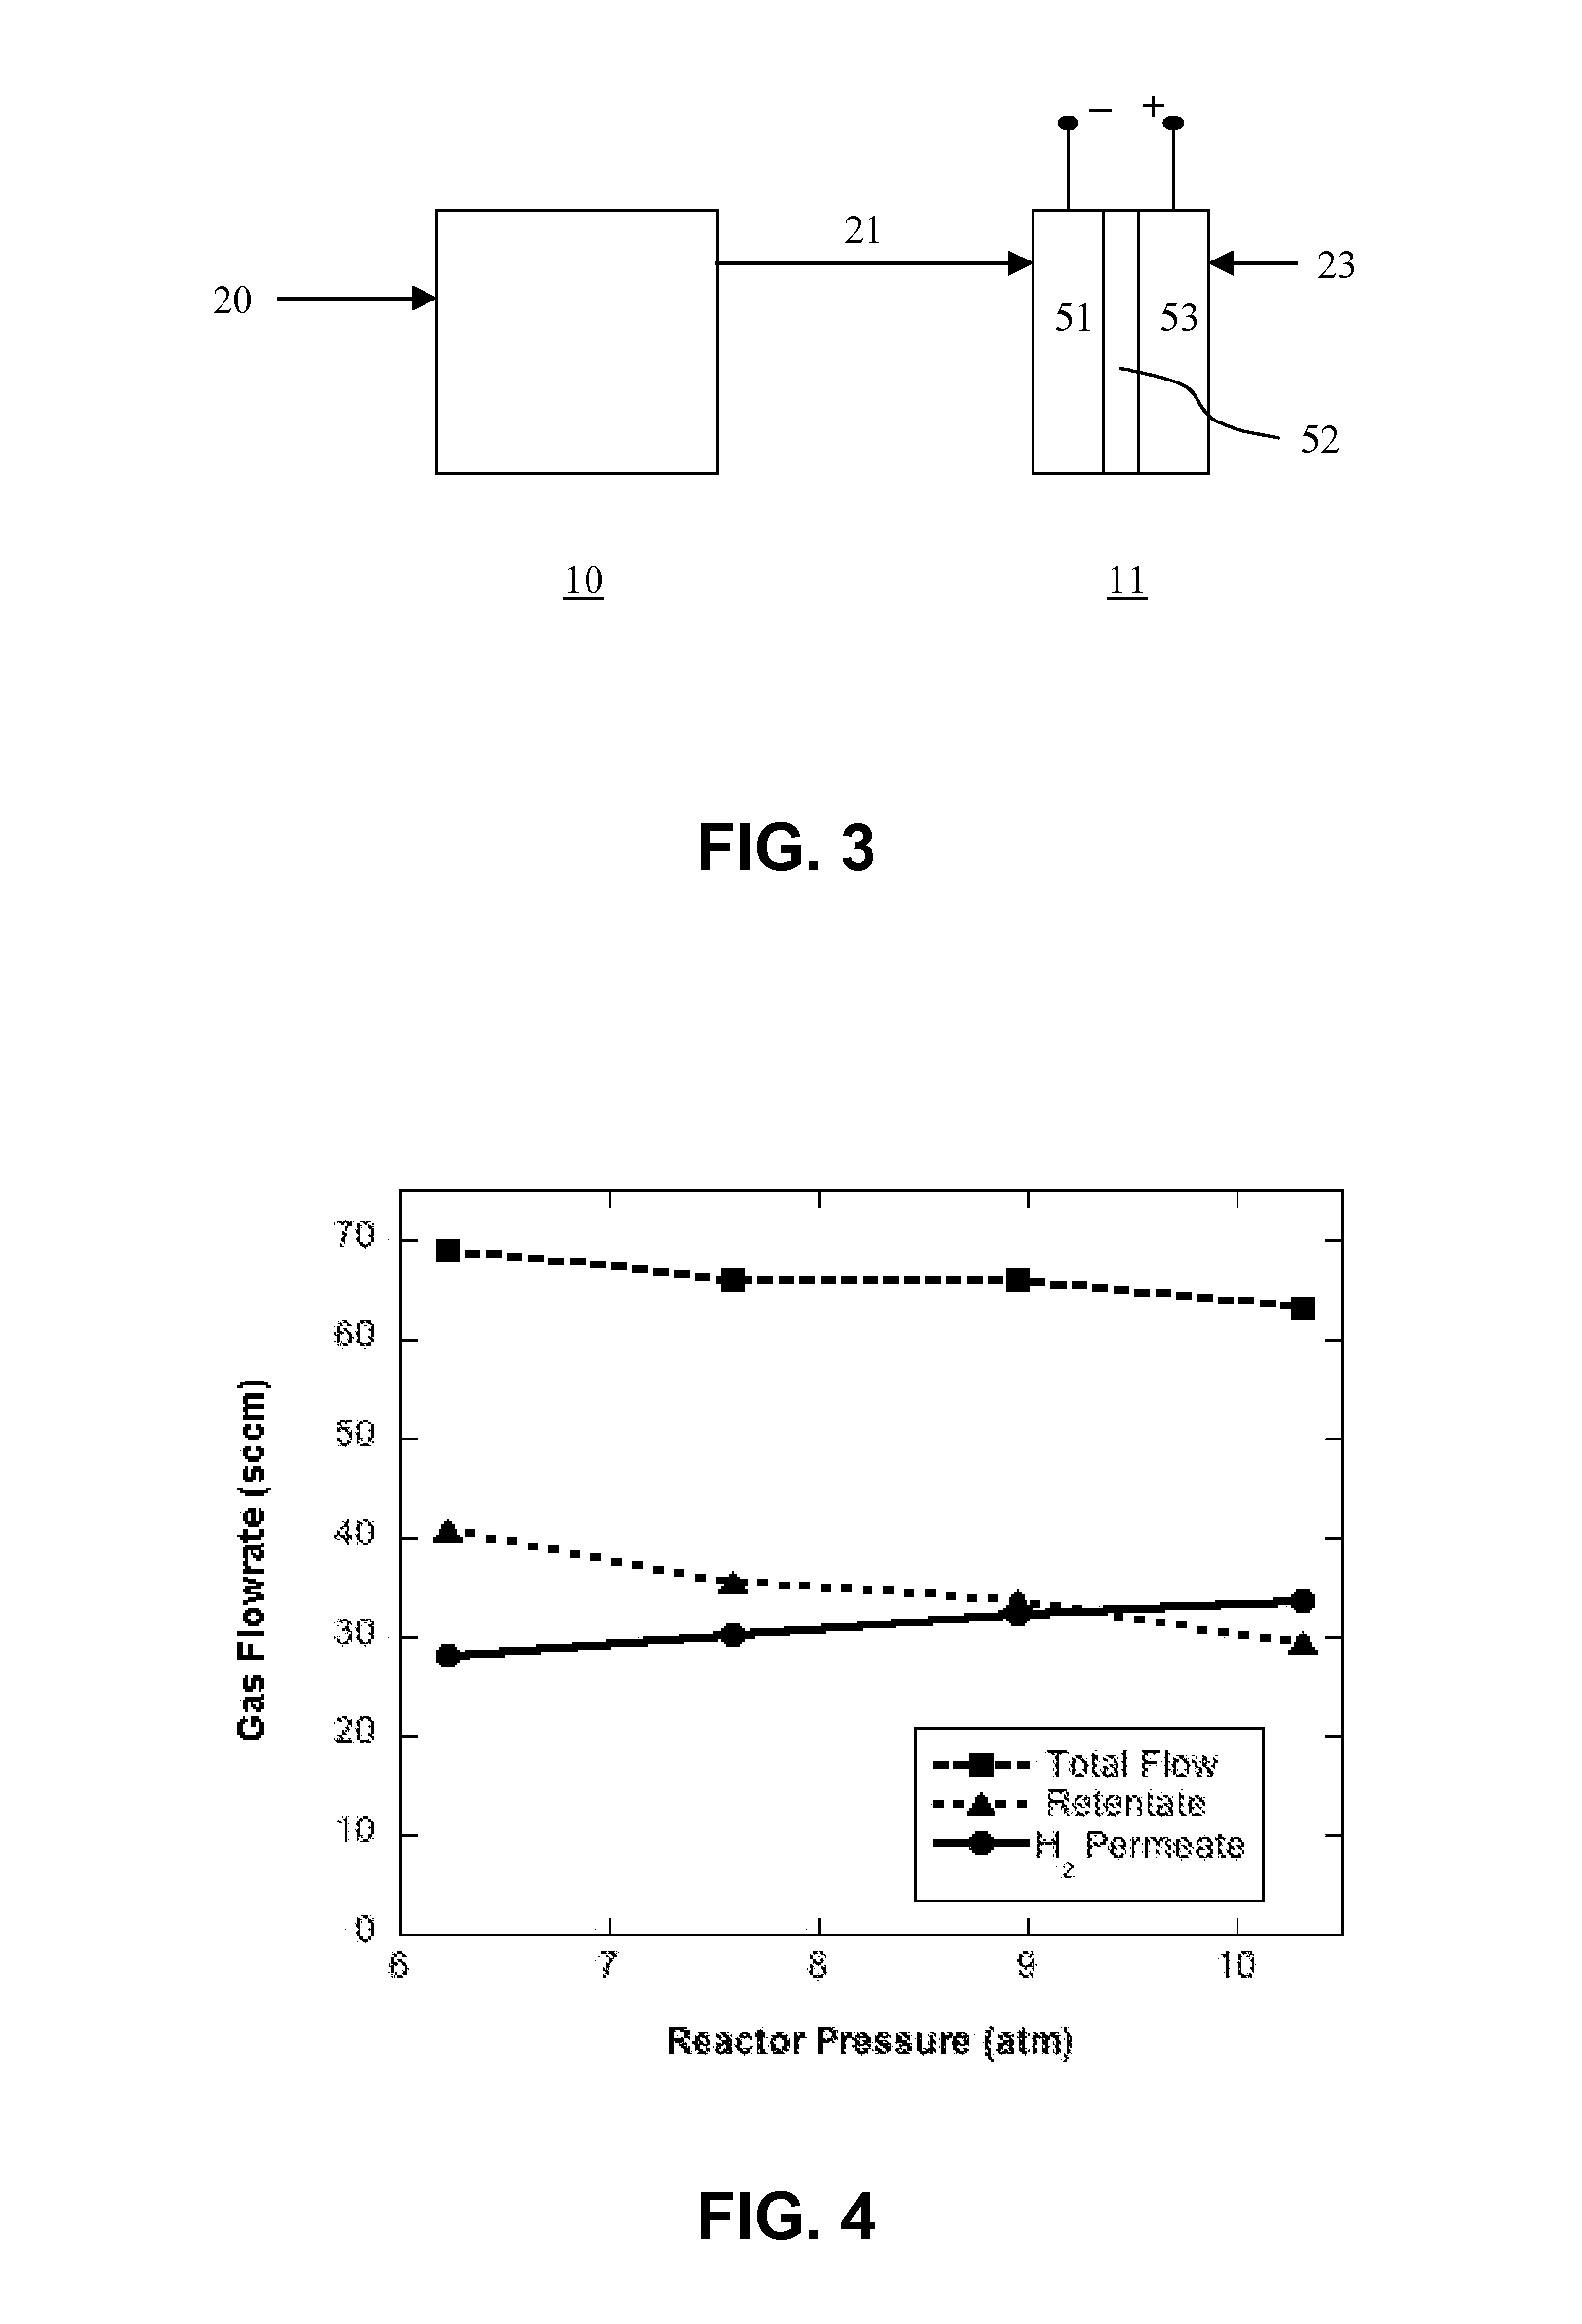 Method and Apparatus for Generating Hydrogen